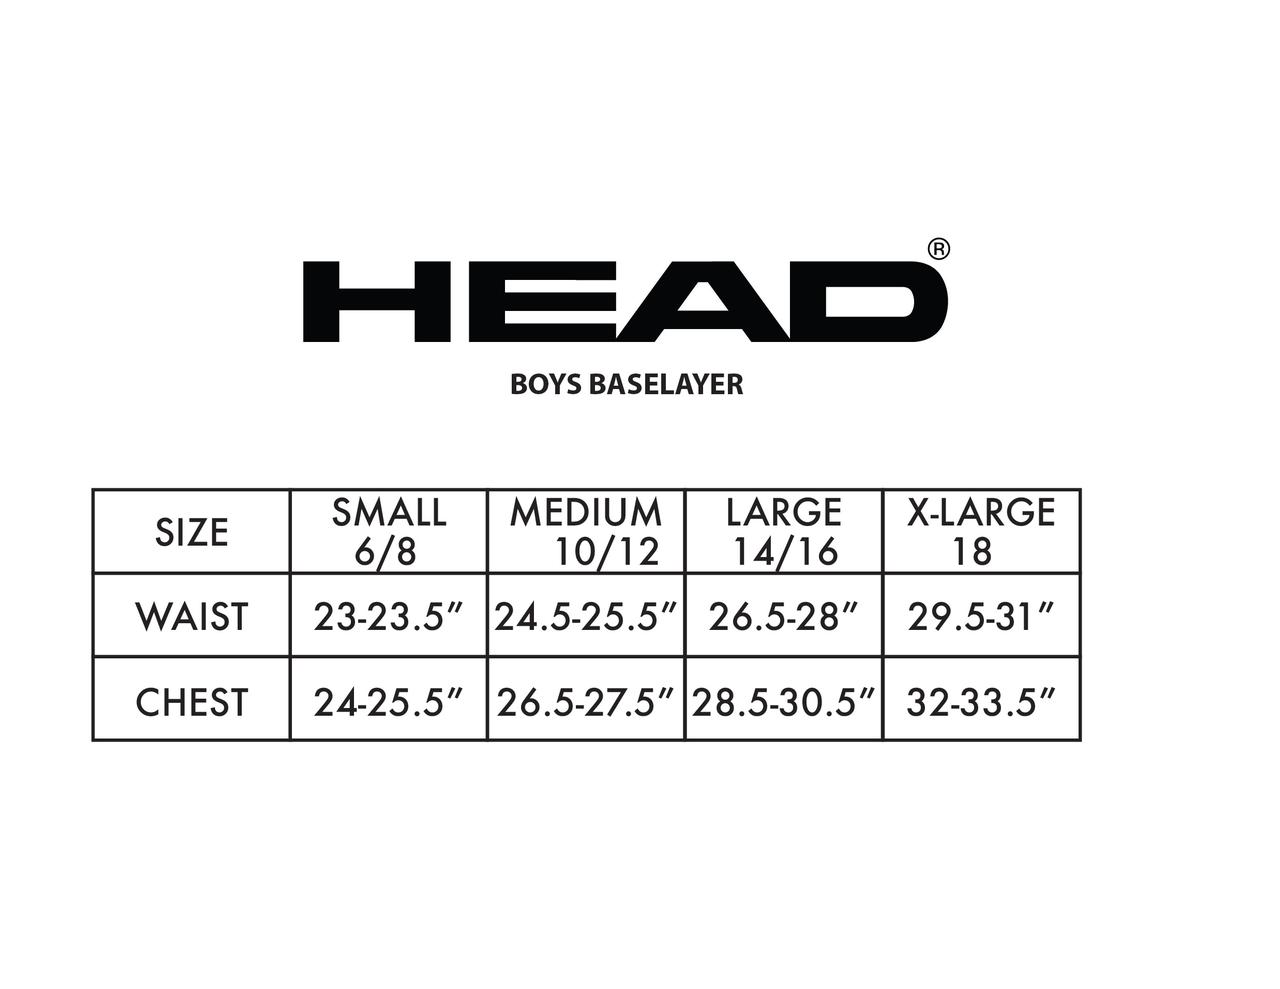 HEAD, Boys Thermal Underwear, 2 Piece Base Layer Set Sizes 6 - 18 - image 2 of 2